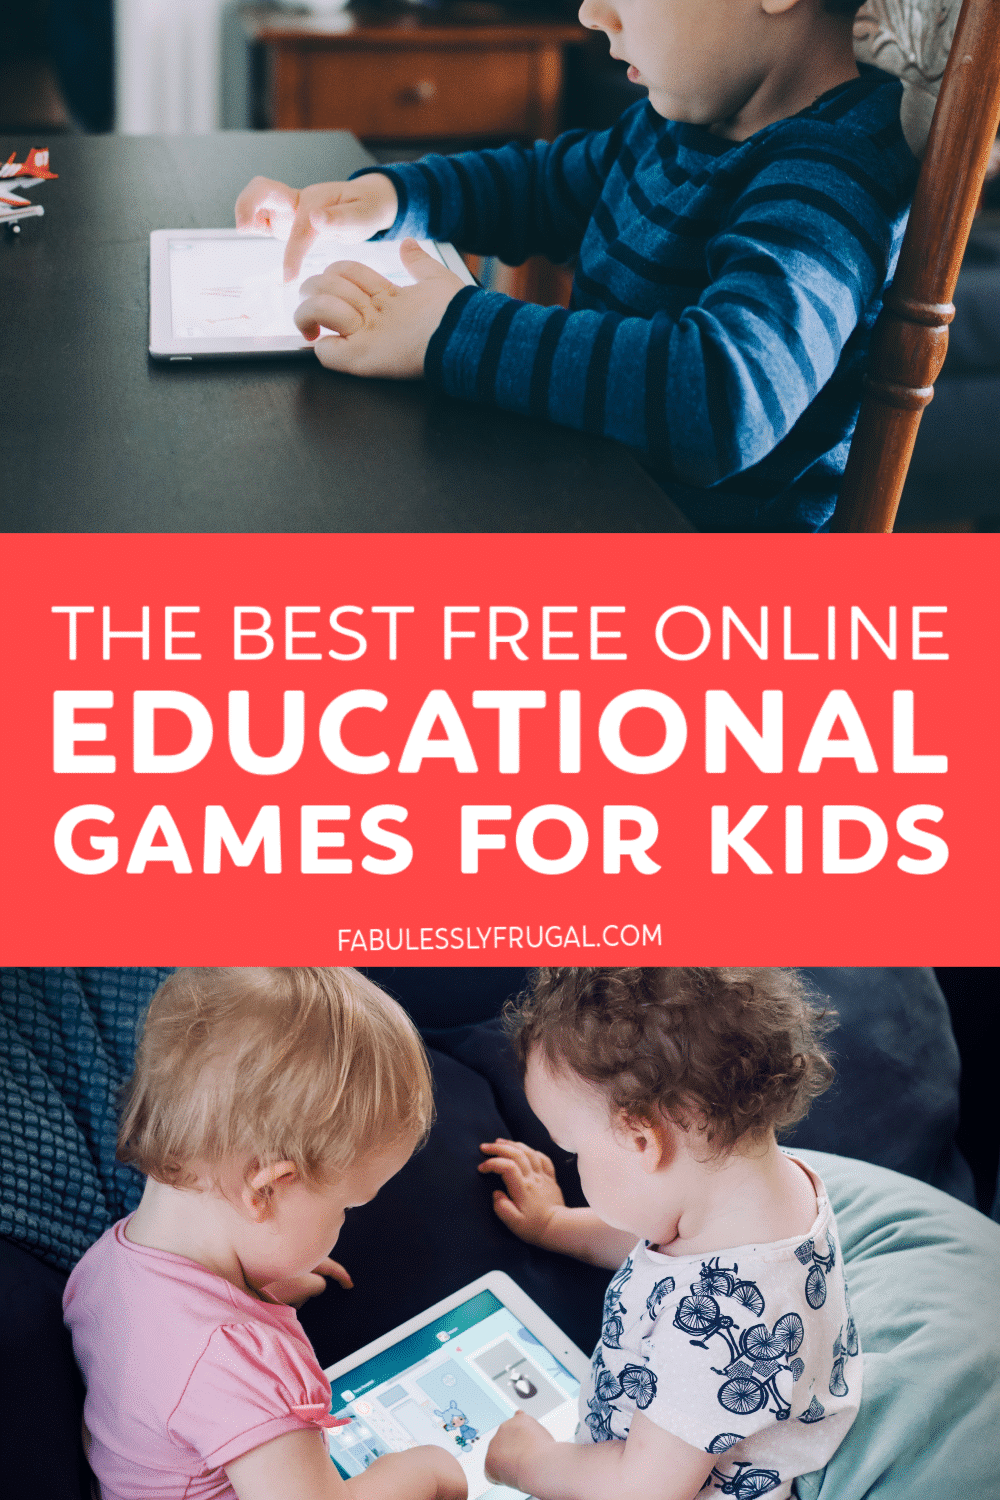 Free online educational games for kids